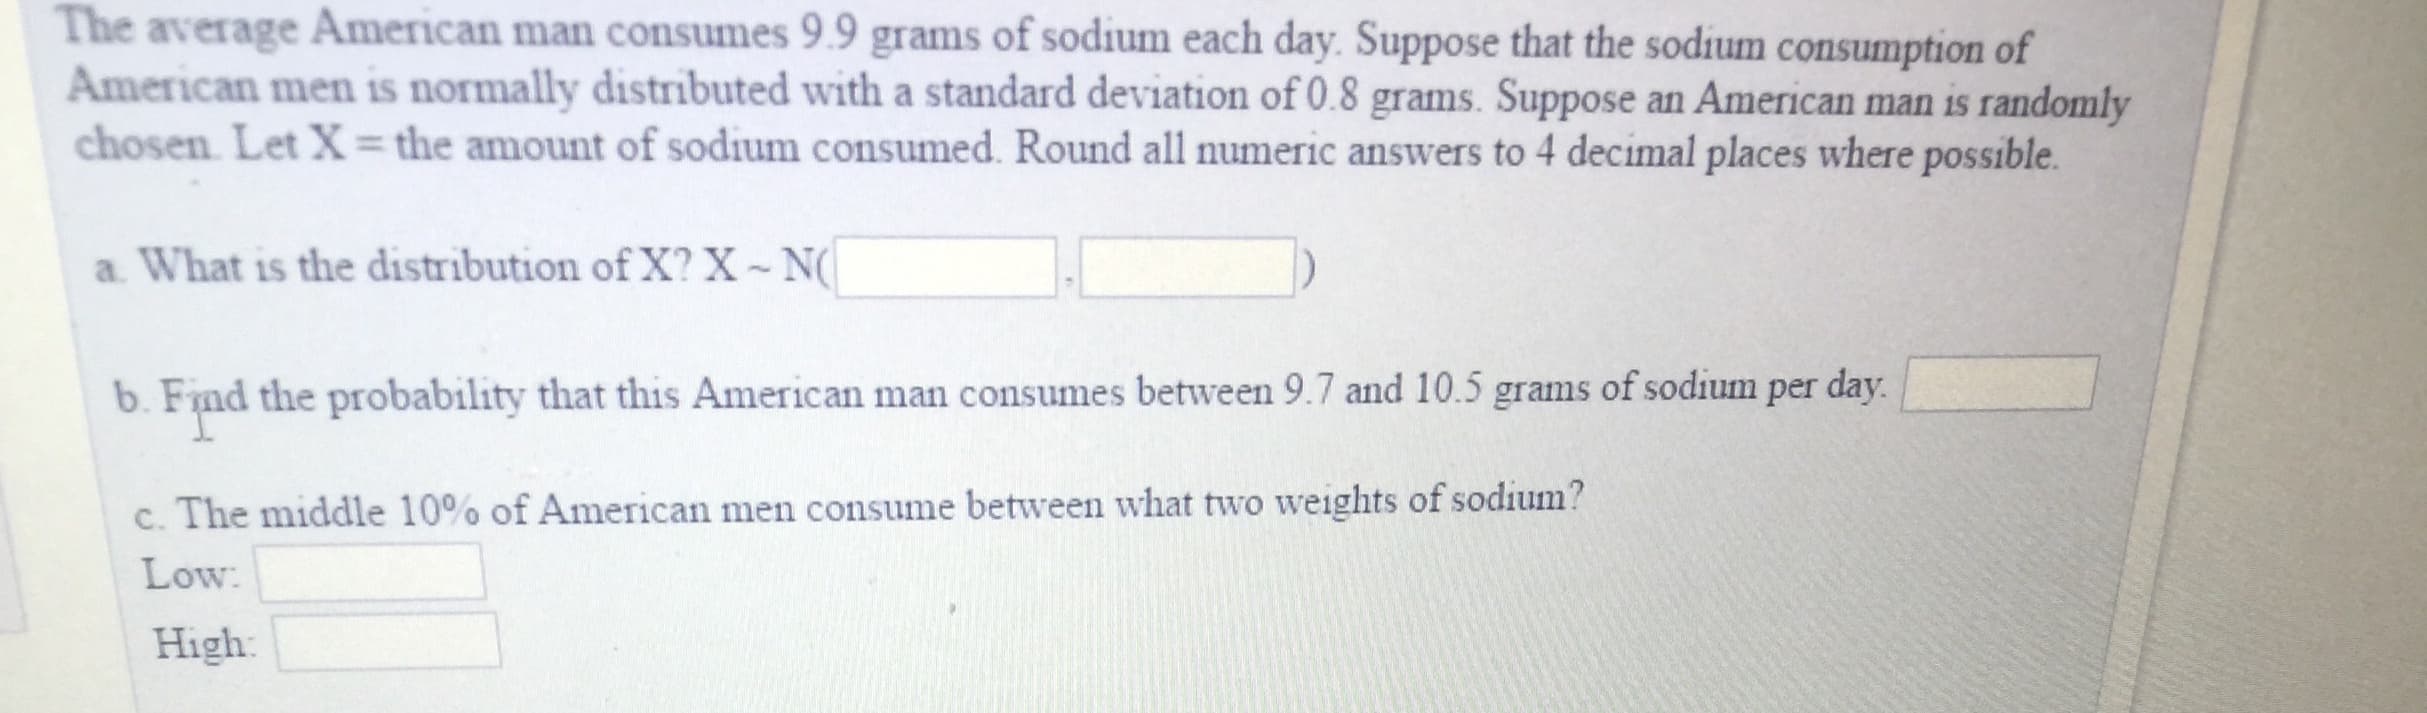 The average American man consumes 9.9 grams of sodium each day. Suppose that the sodium consumption of
American men is normally distributed with a standard deviation of 0.8 grams. Suppose an American man is randomly
chosen Let X-the amount of sodium consumed. Round all numeric answers to 4 decimal places where possible
a What is the distribution of X? X N
b. Find the probability that this American man consumes between 9.7 and 10.5 grams of sodium per day
c. The middle 10% of American men consume between what two weights of sodium?
Low
High
